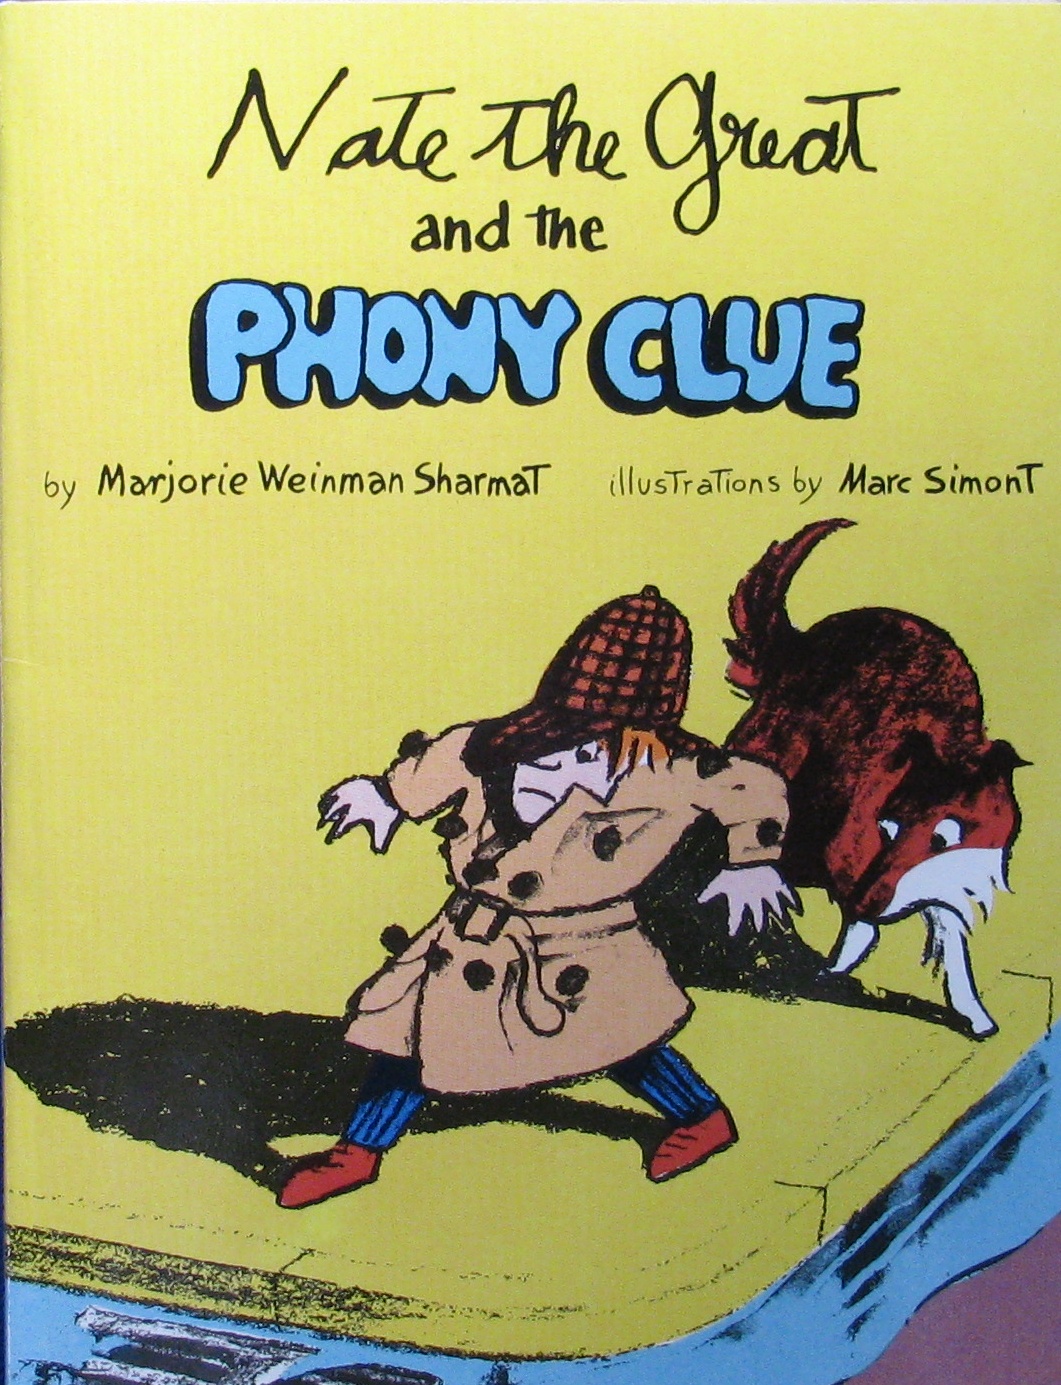 nate the great and the phony clue